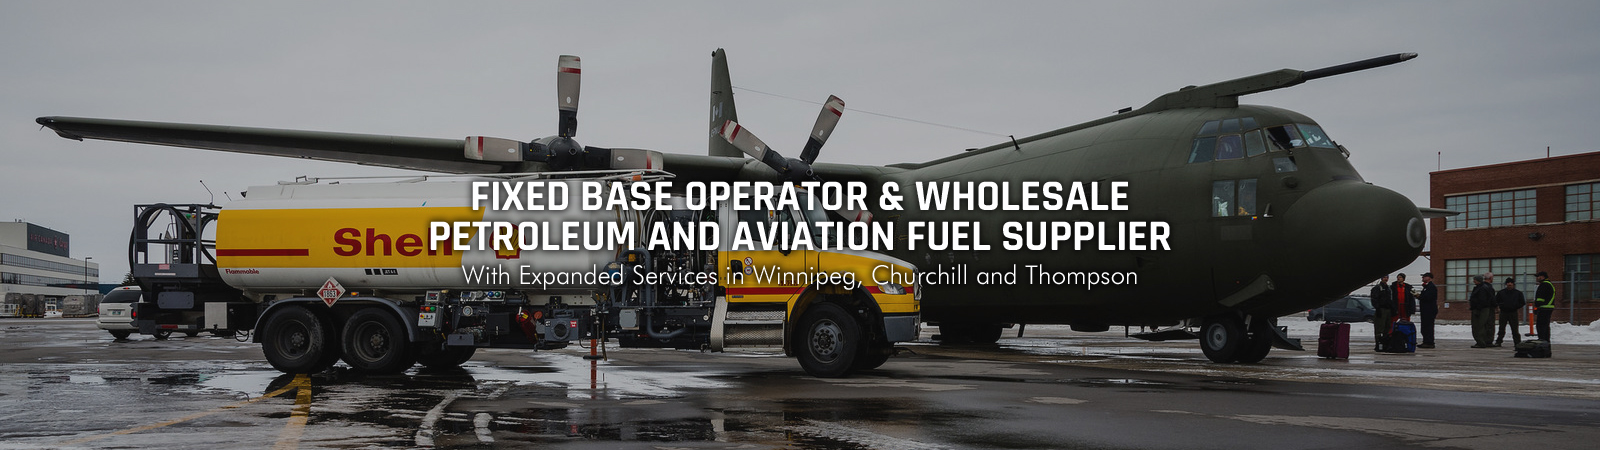 Fixed Base Operator & wholesale petroleum and aviation fuel supplier